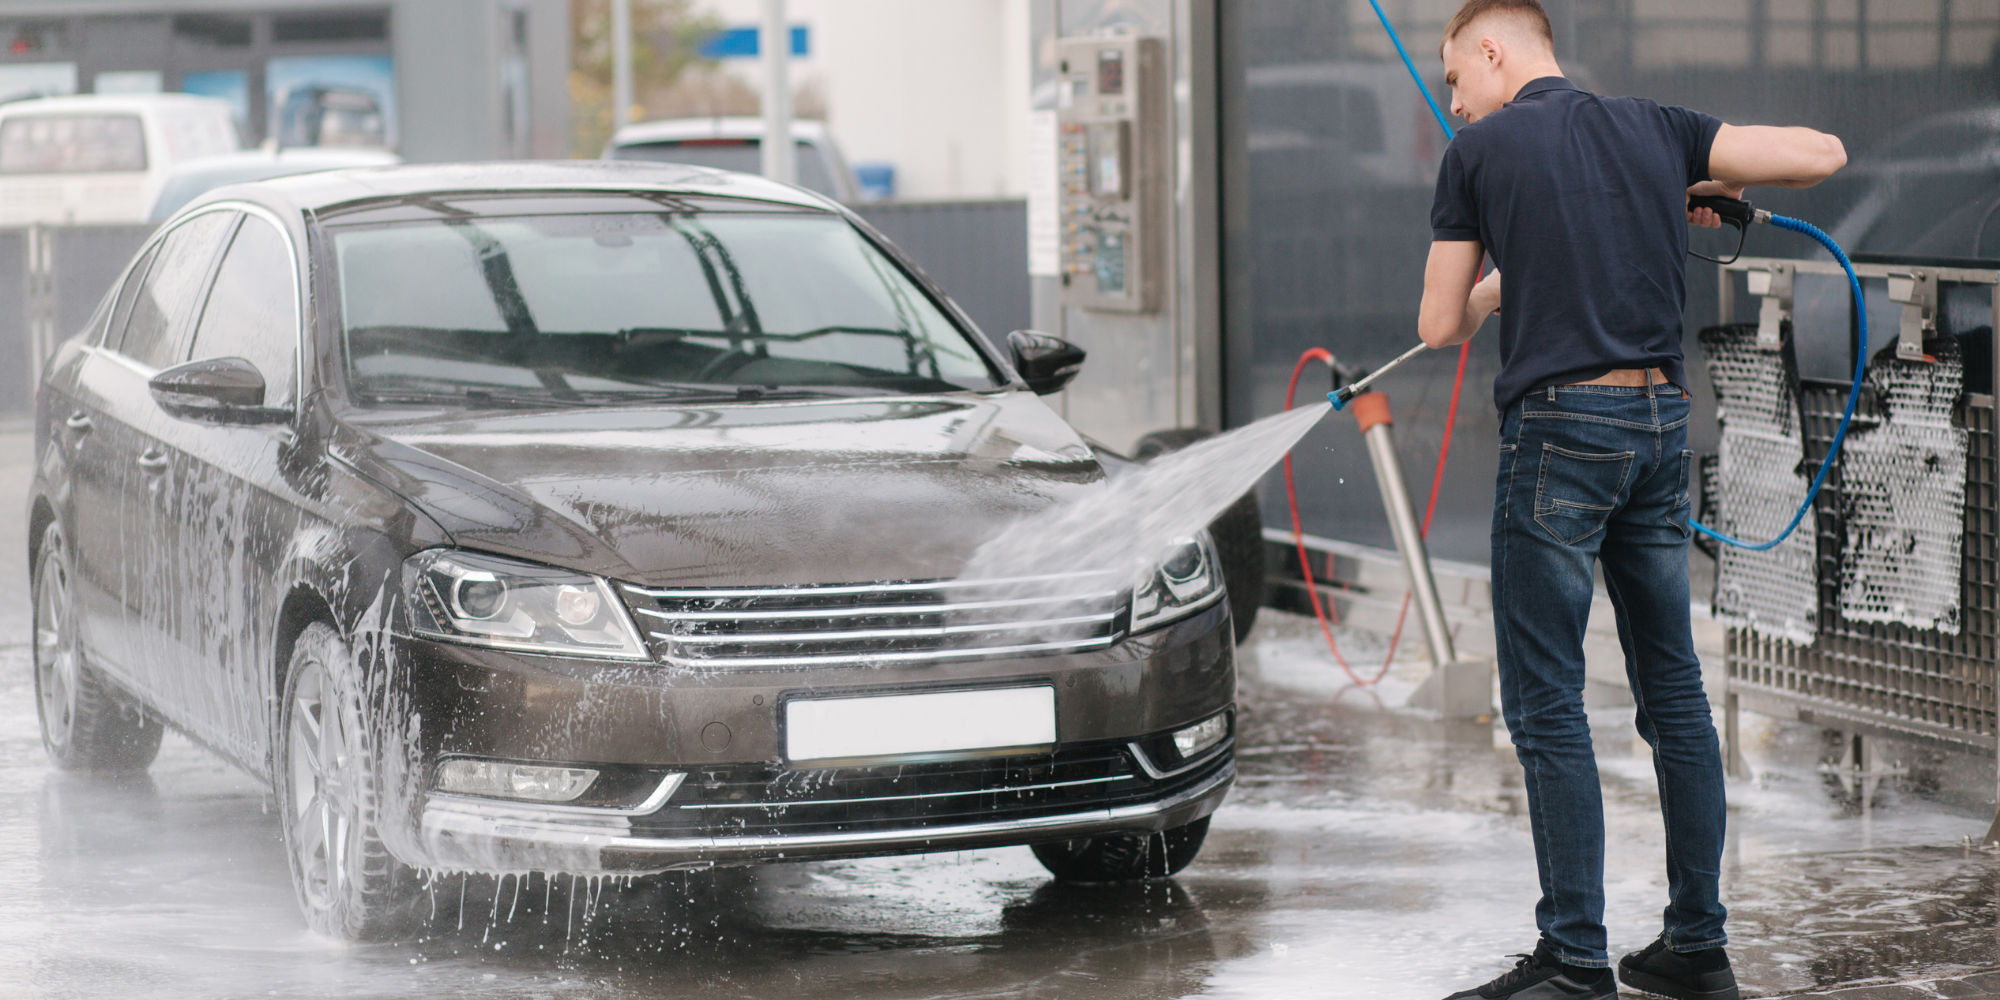 Choosing the Best Pressure Washer for Cleaning a Driveway and Garage